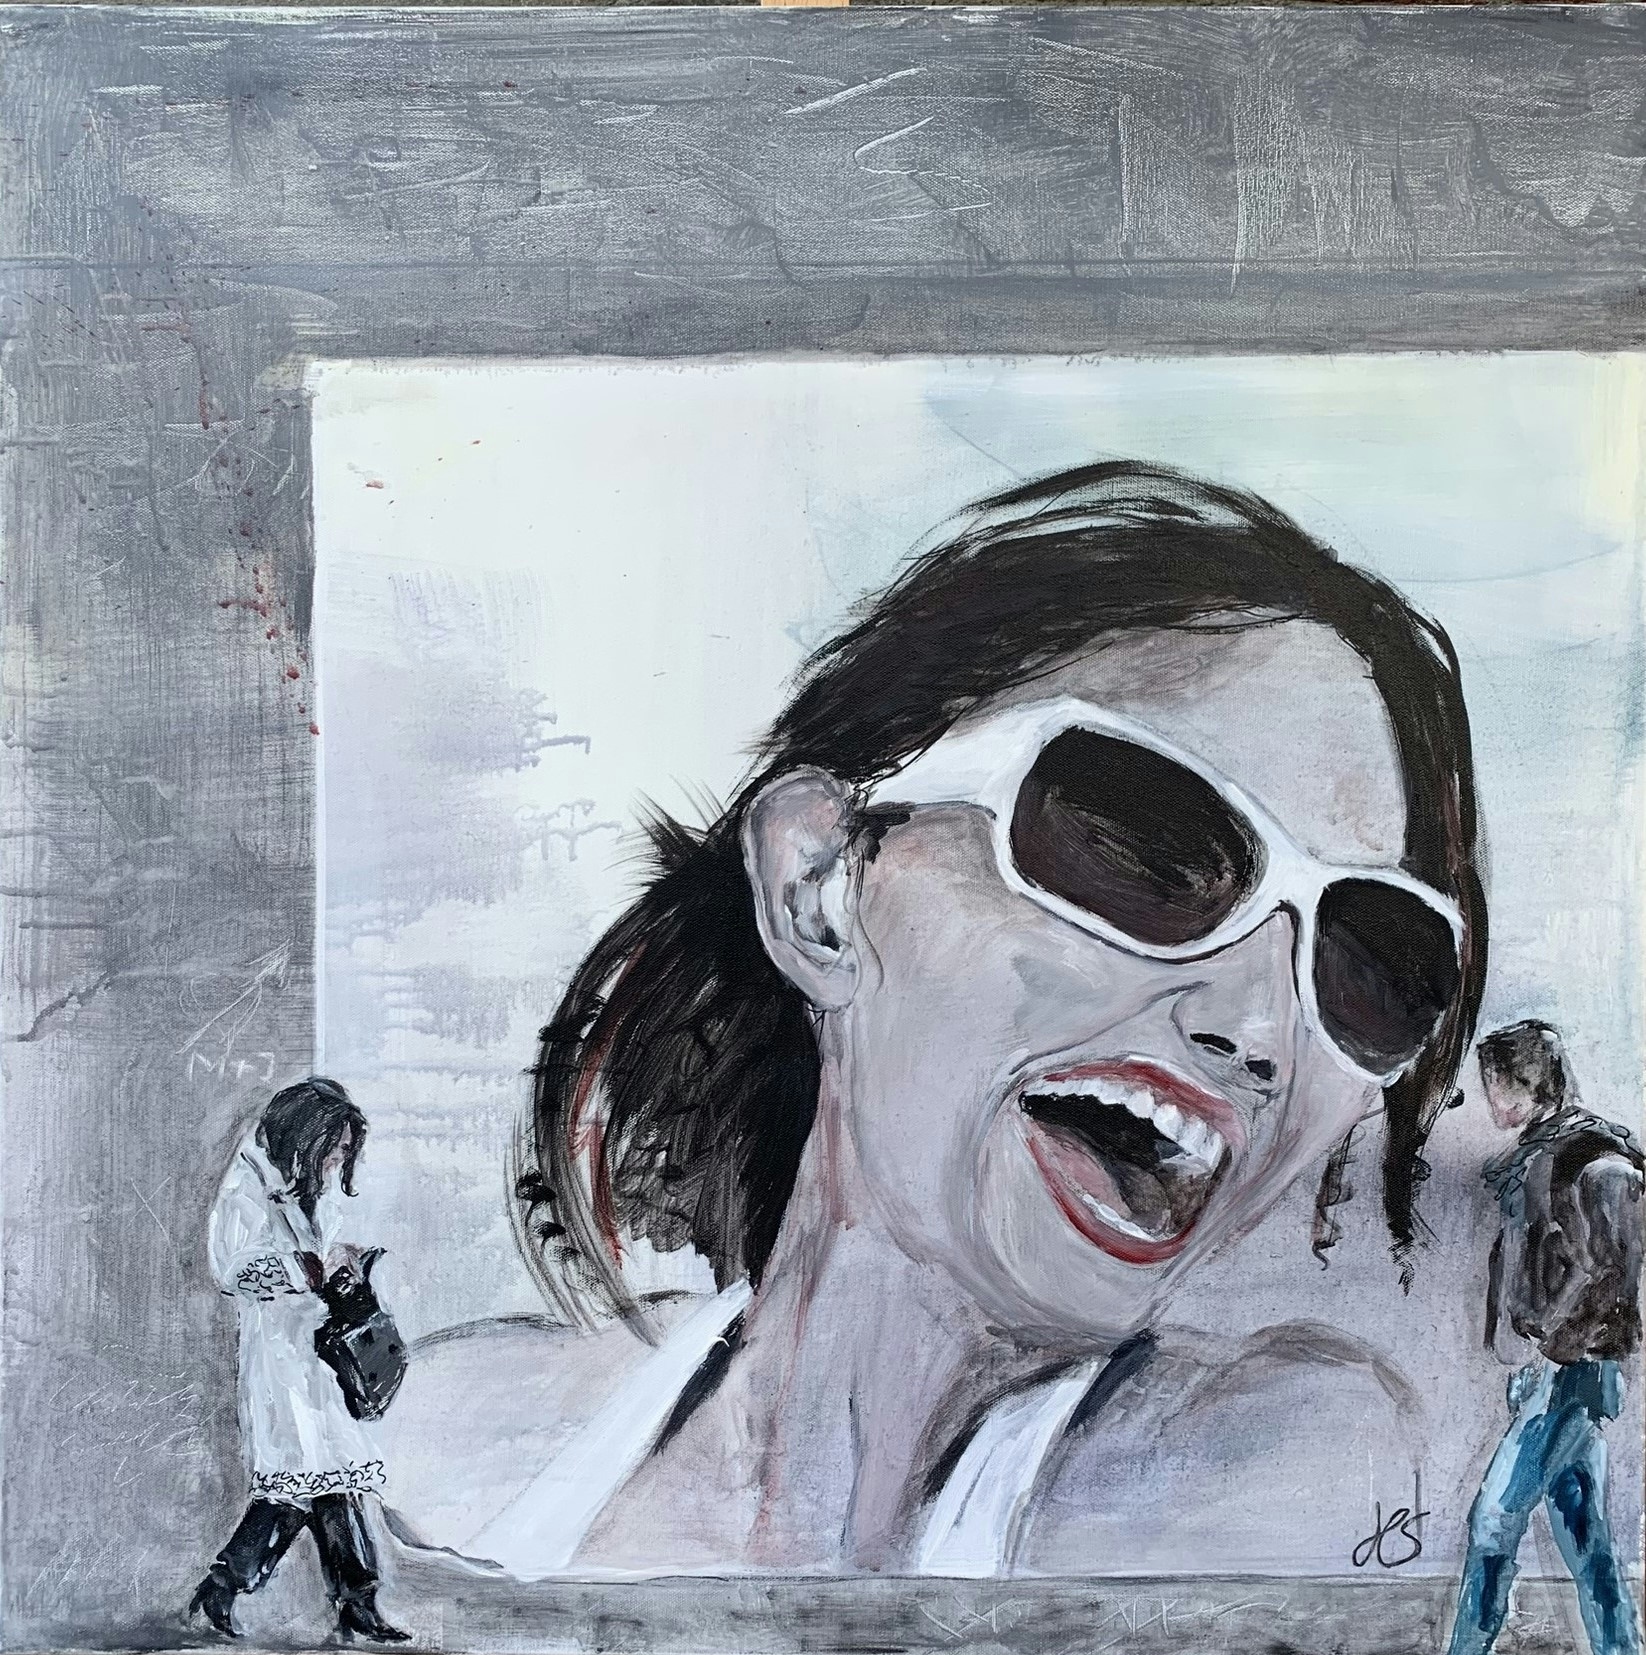 The artwork by Heike Schümann depicts an oversized, laughing woman on a poster, and people passing by